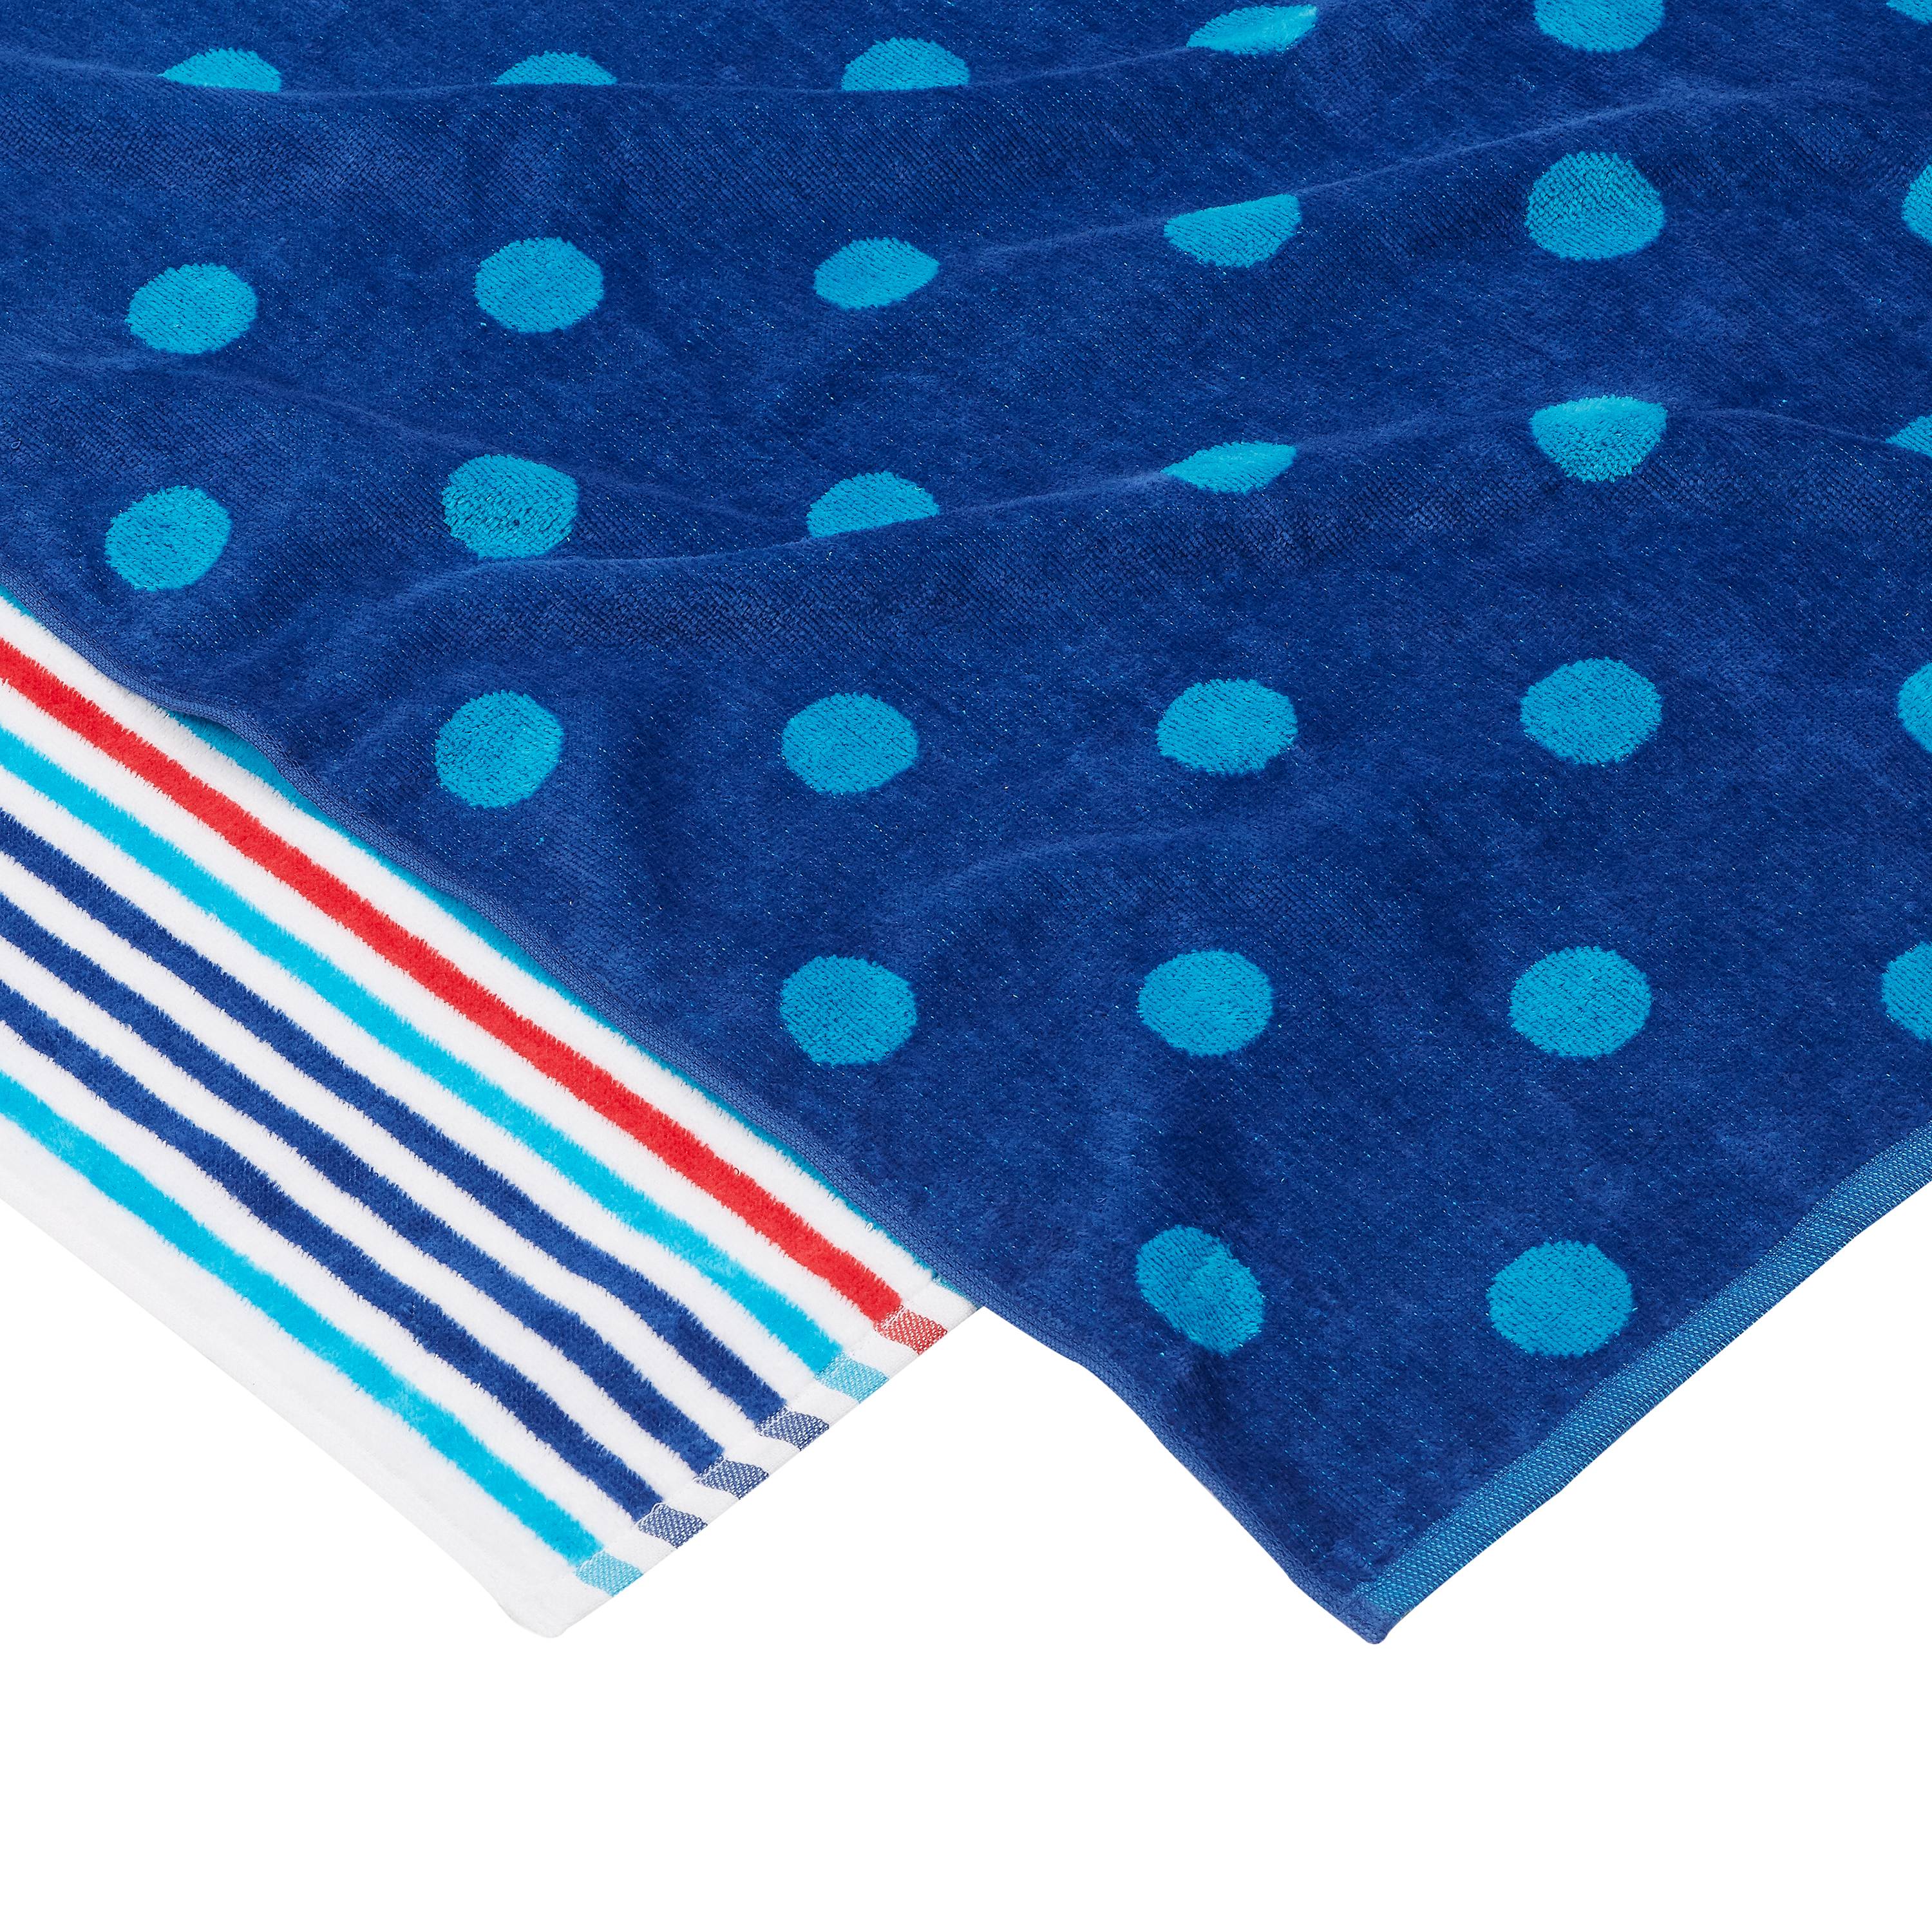 Mainstays Stripe and Polka Dot Reversible Cotton Beach Towel, 2 Pack - image 3 of 4